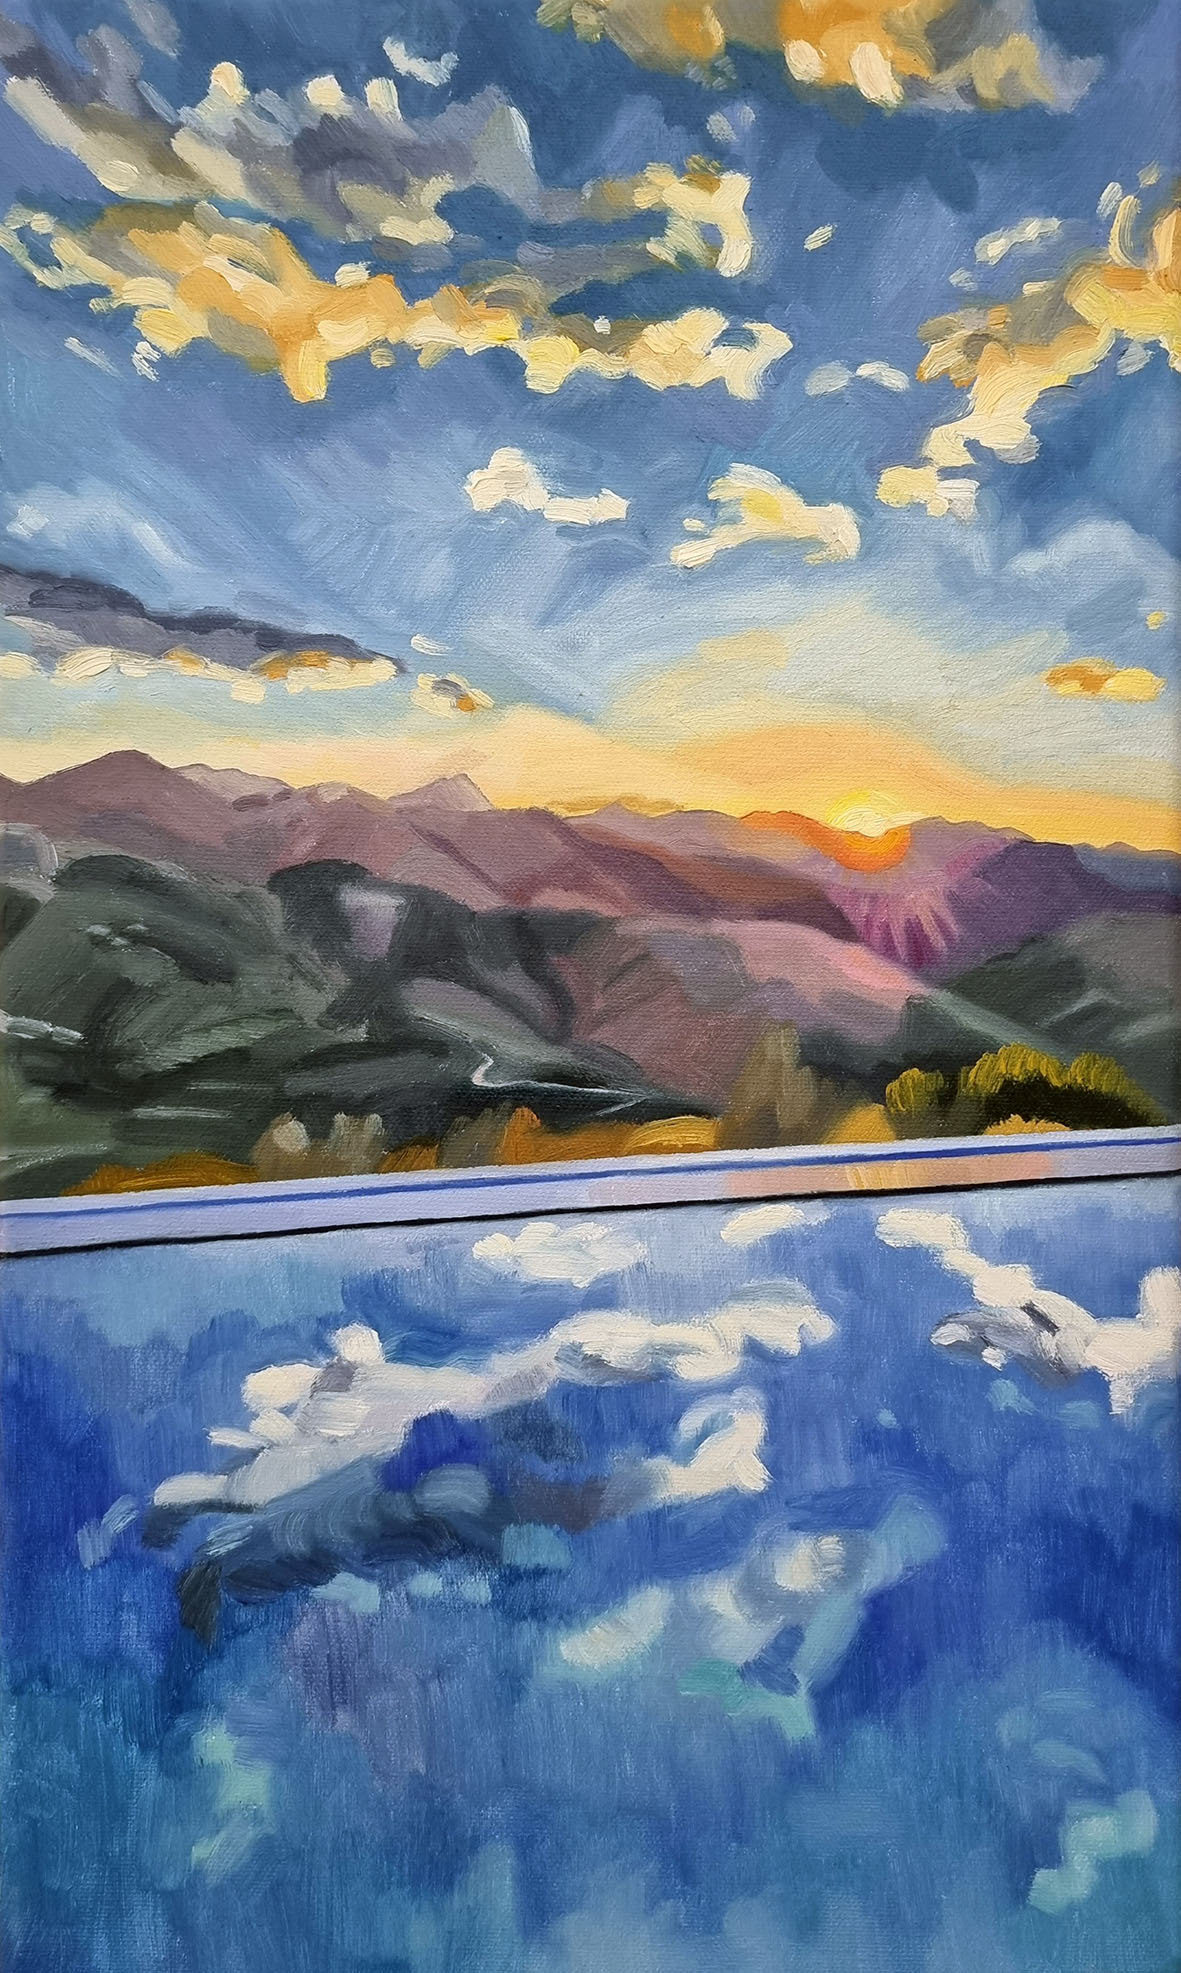 Original landscape oil painting - bottom half of the painting is swimming pool with cloud reflections, with mountains and sky in the distance and a bright orange sun rising.